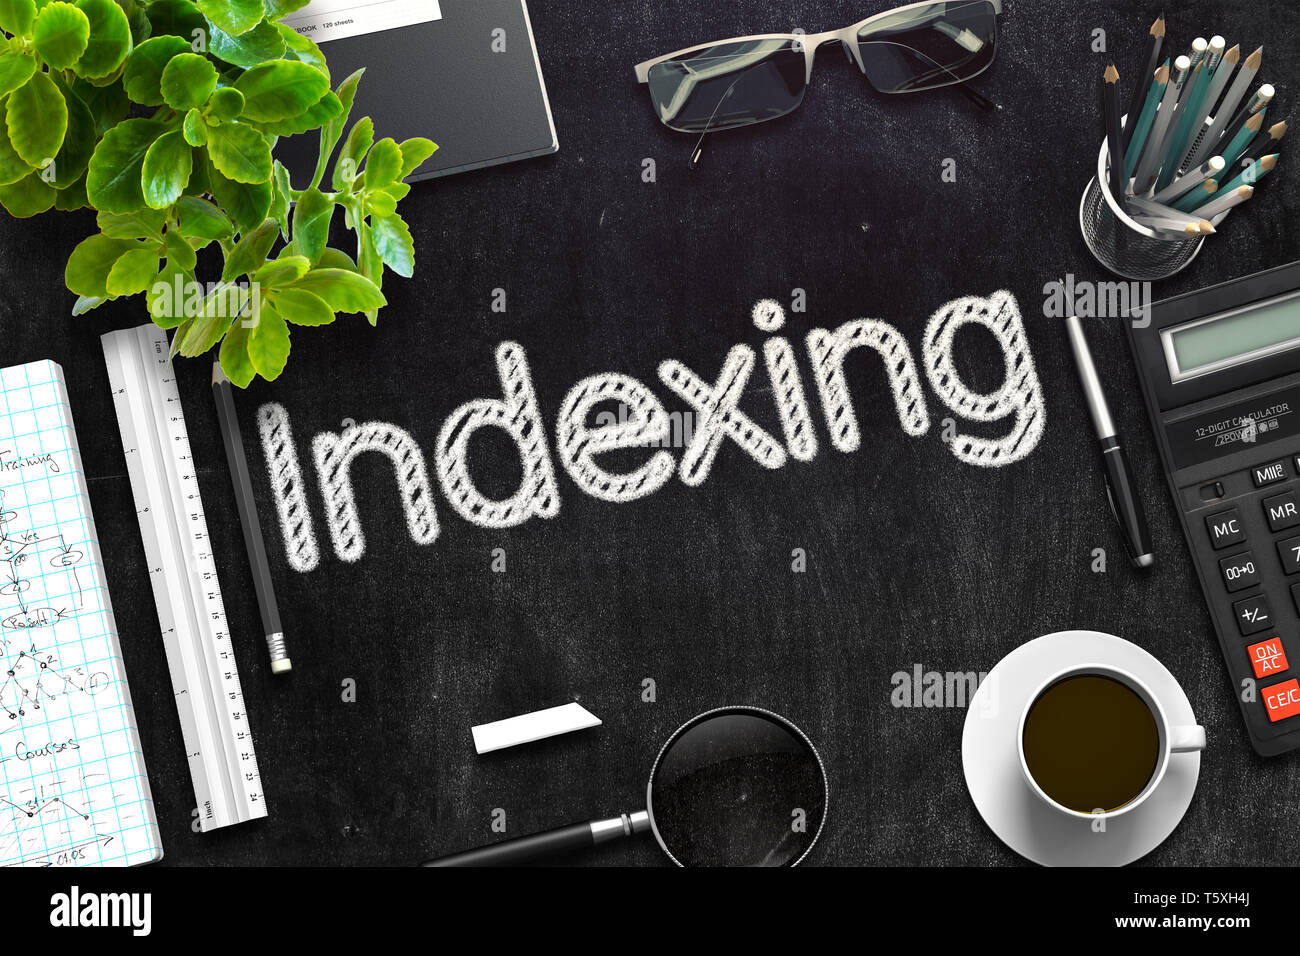 Indexing Concept on Black Chalkboard. 3d Rendering. Toned Image. Stock Photo